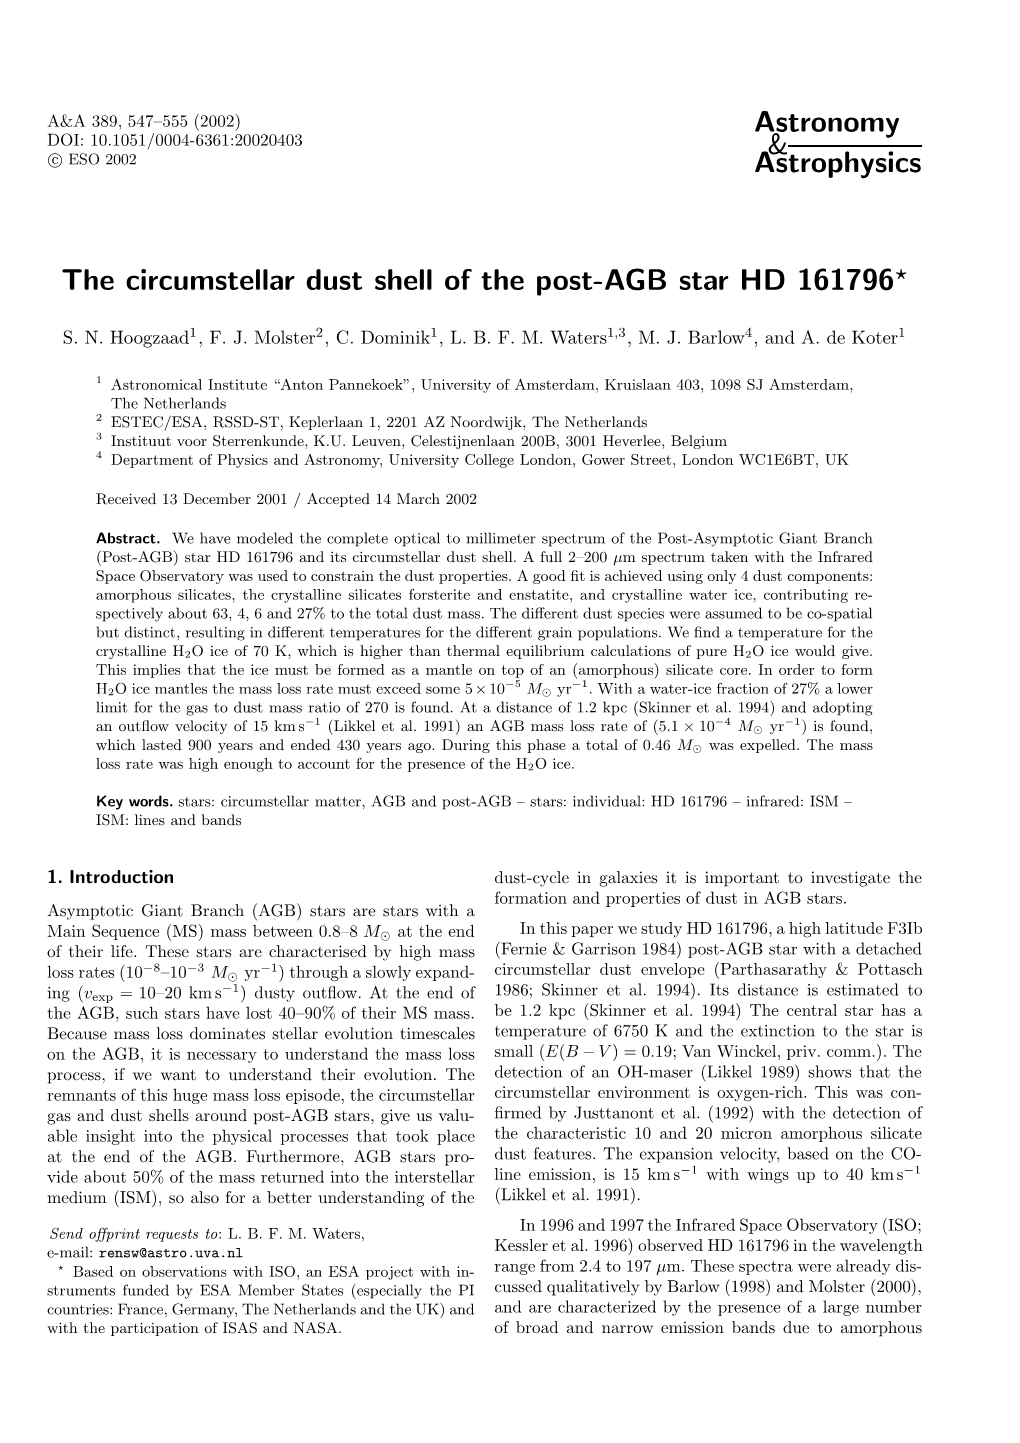 Astronomy & Astrophysics the Circumstellar Dust Shell of the Post-AGB Star HD 161796